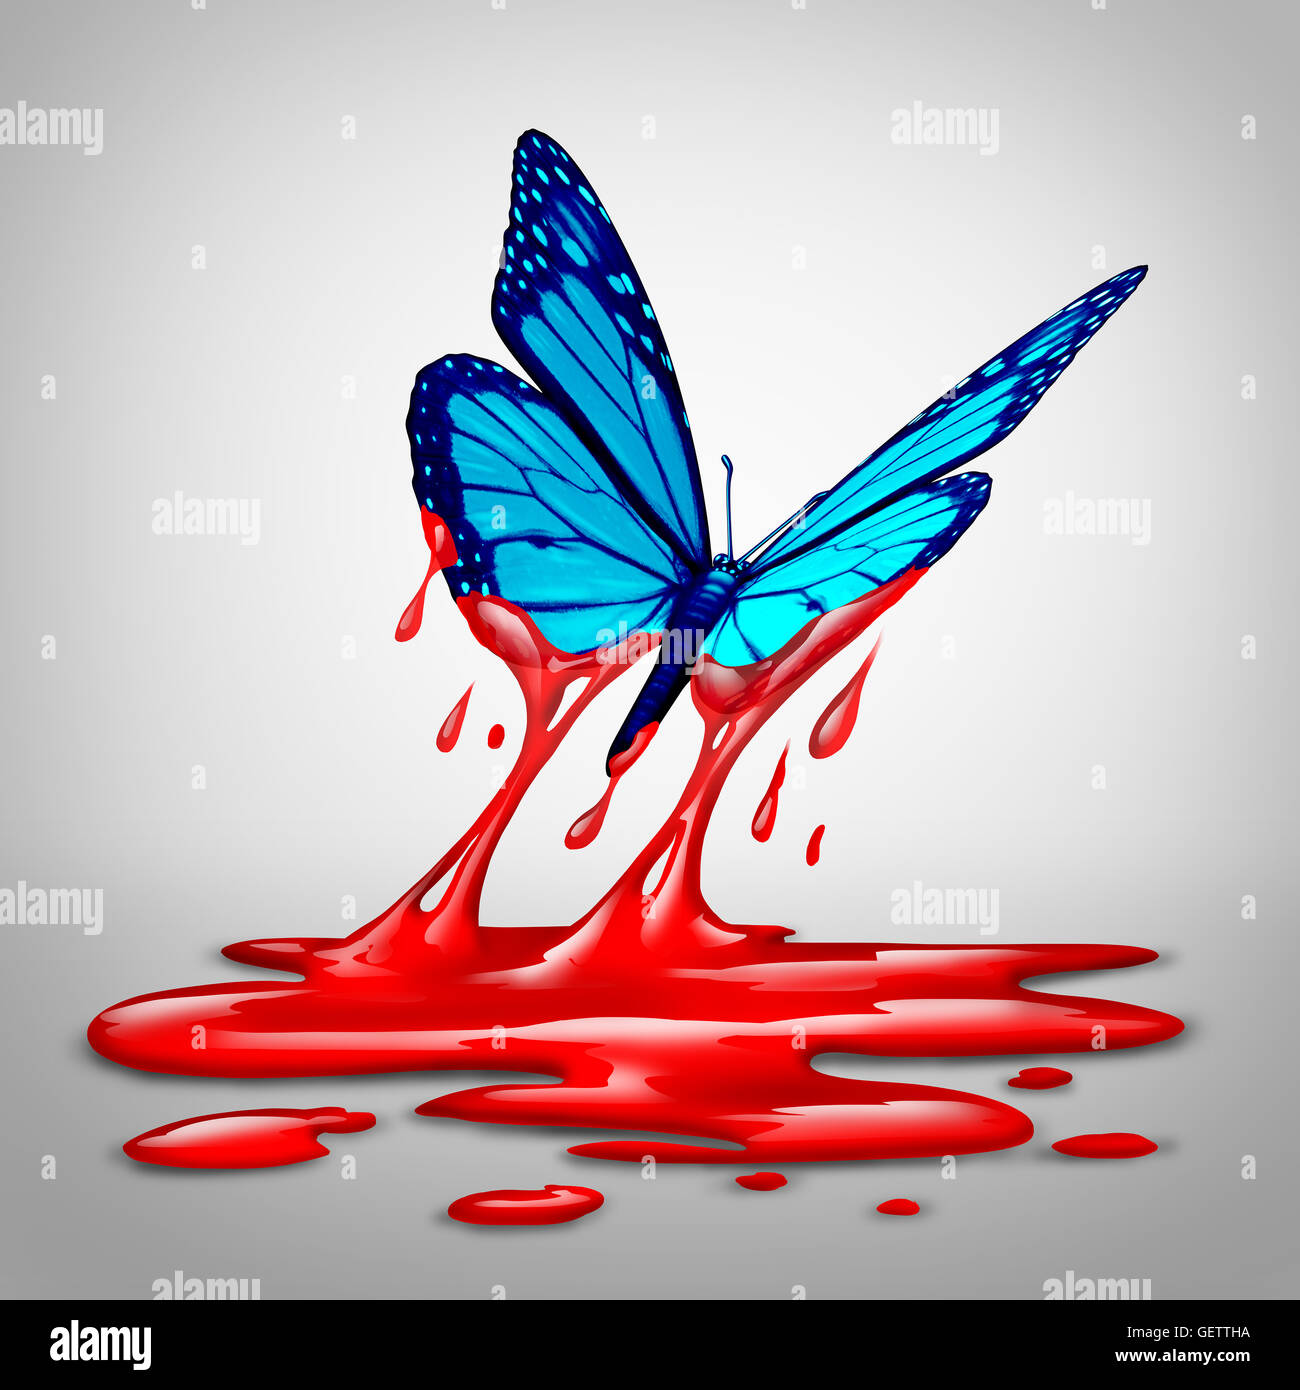 Hope After Violence or optimism concept and diplomacy symbol as a butterfly flying out of blood as an icon for humanity Stock Photo